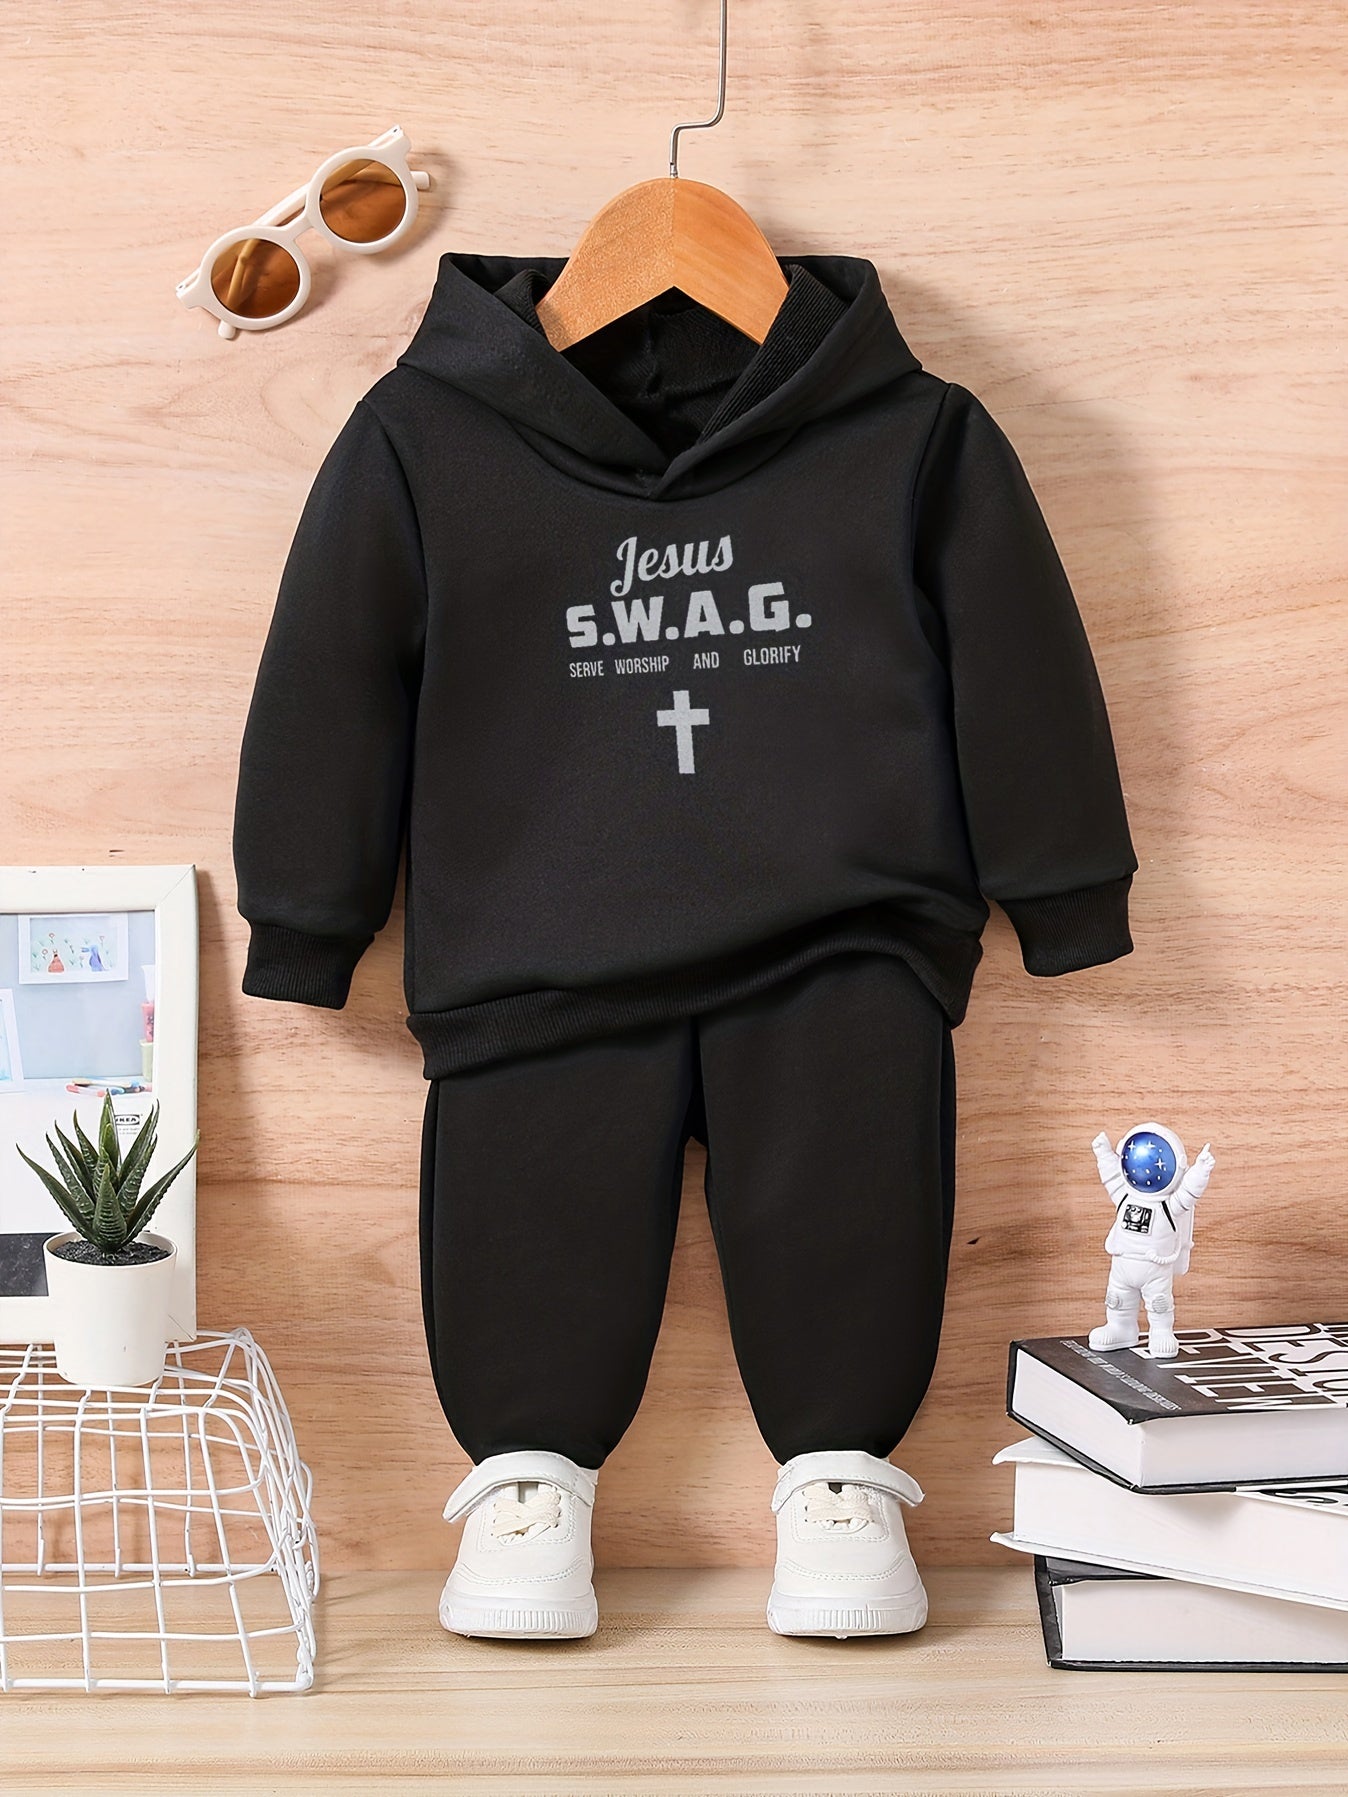 JESUS S.W.A.G Toddler Christian Casual Outfit claimedbygoddesigns